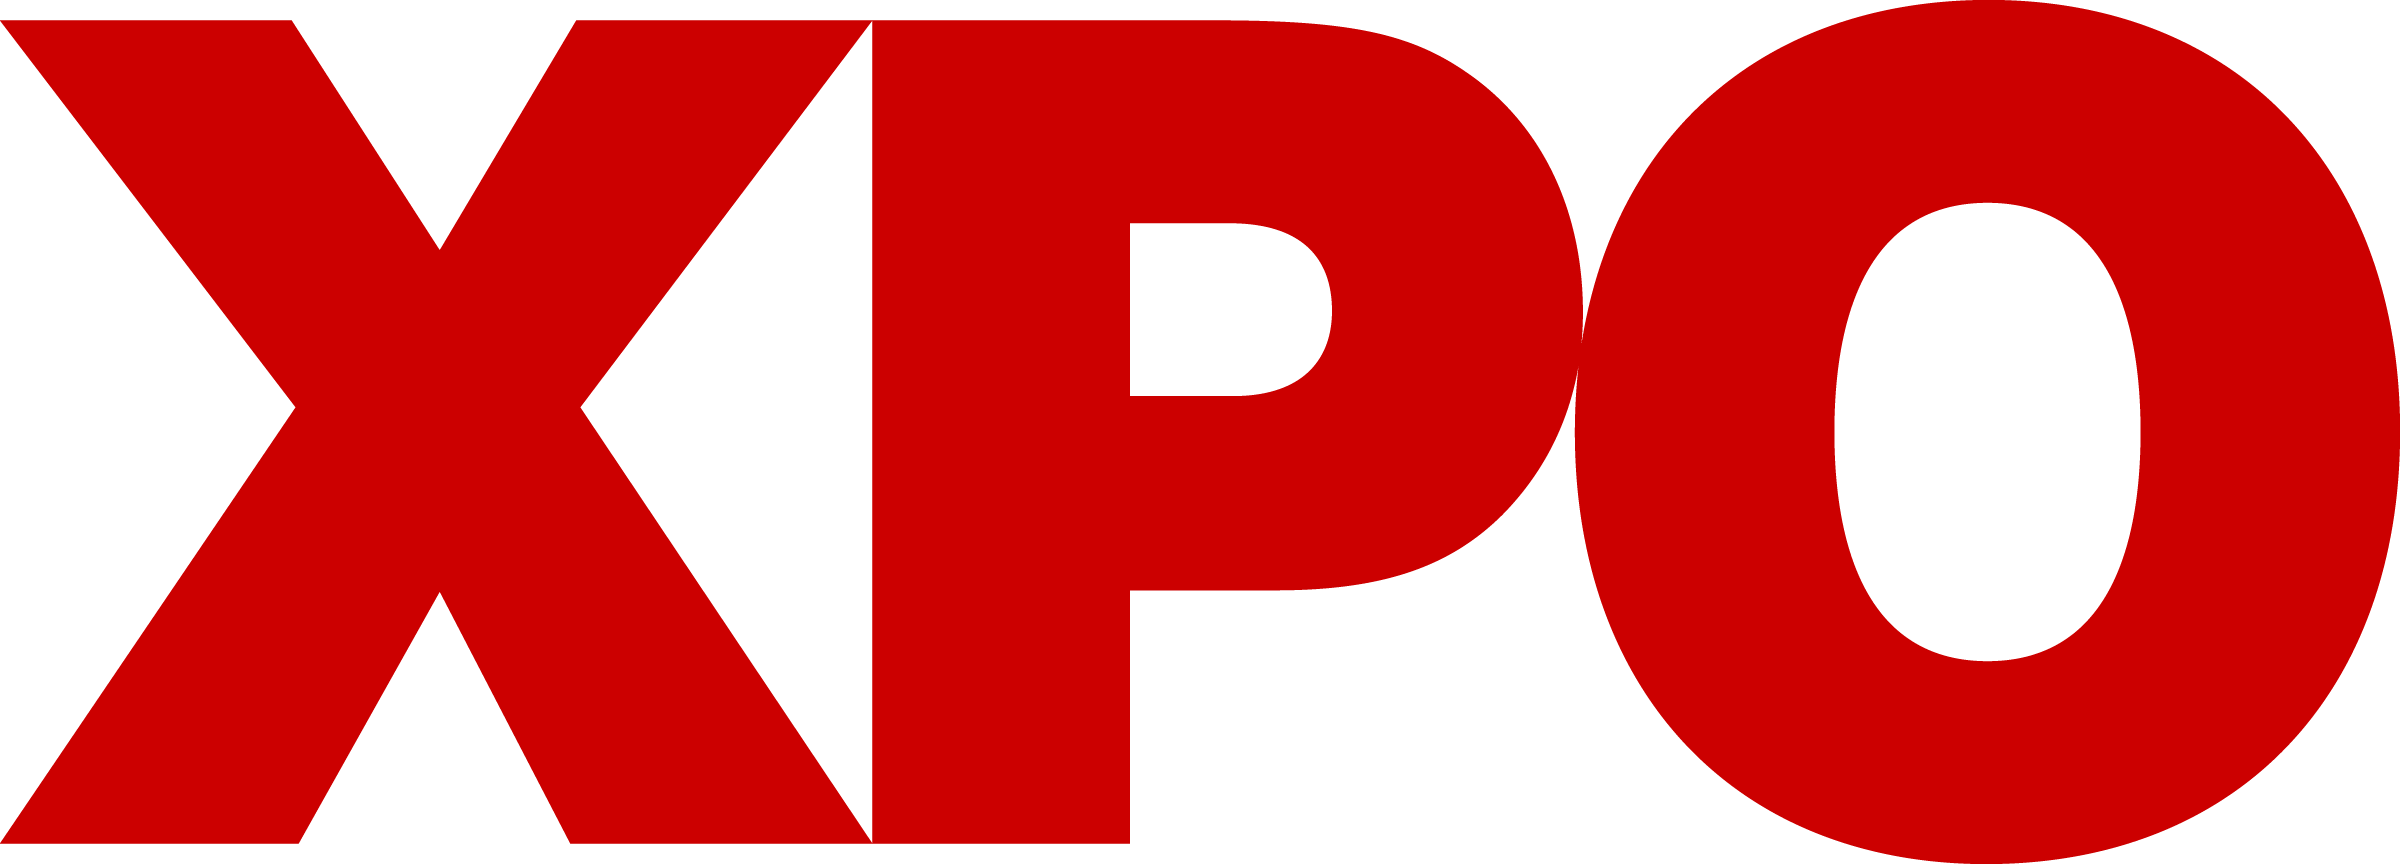 XPO Provides North American LTL Operating Data for August 2023 378aec62-5d02-4947-a49f-6b239fc7402d?size=1